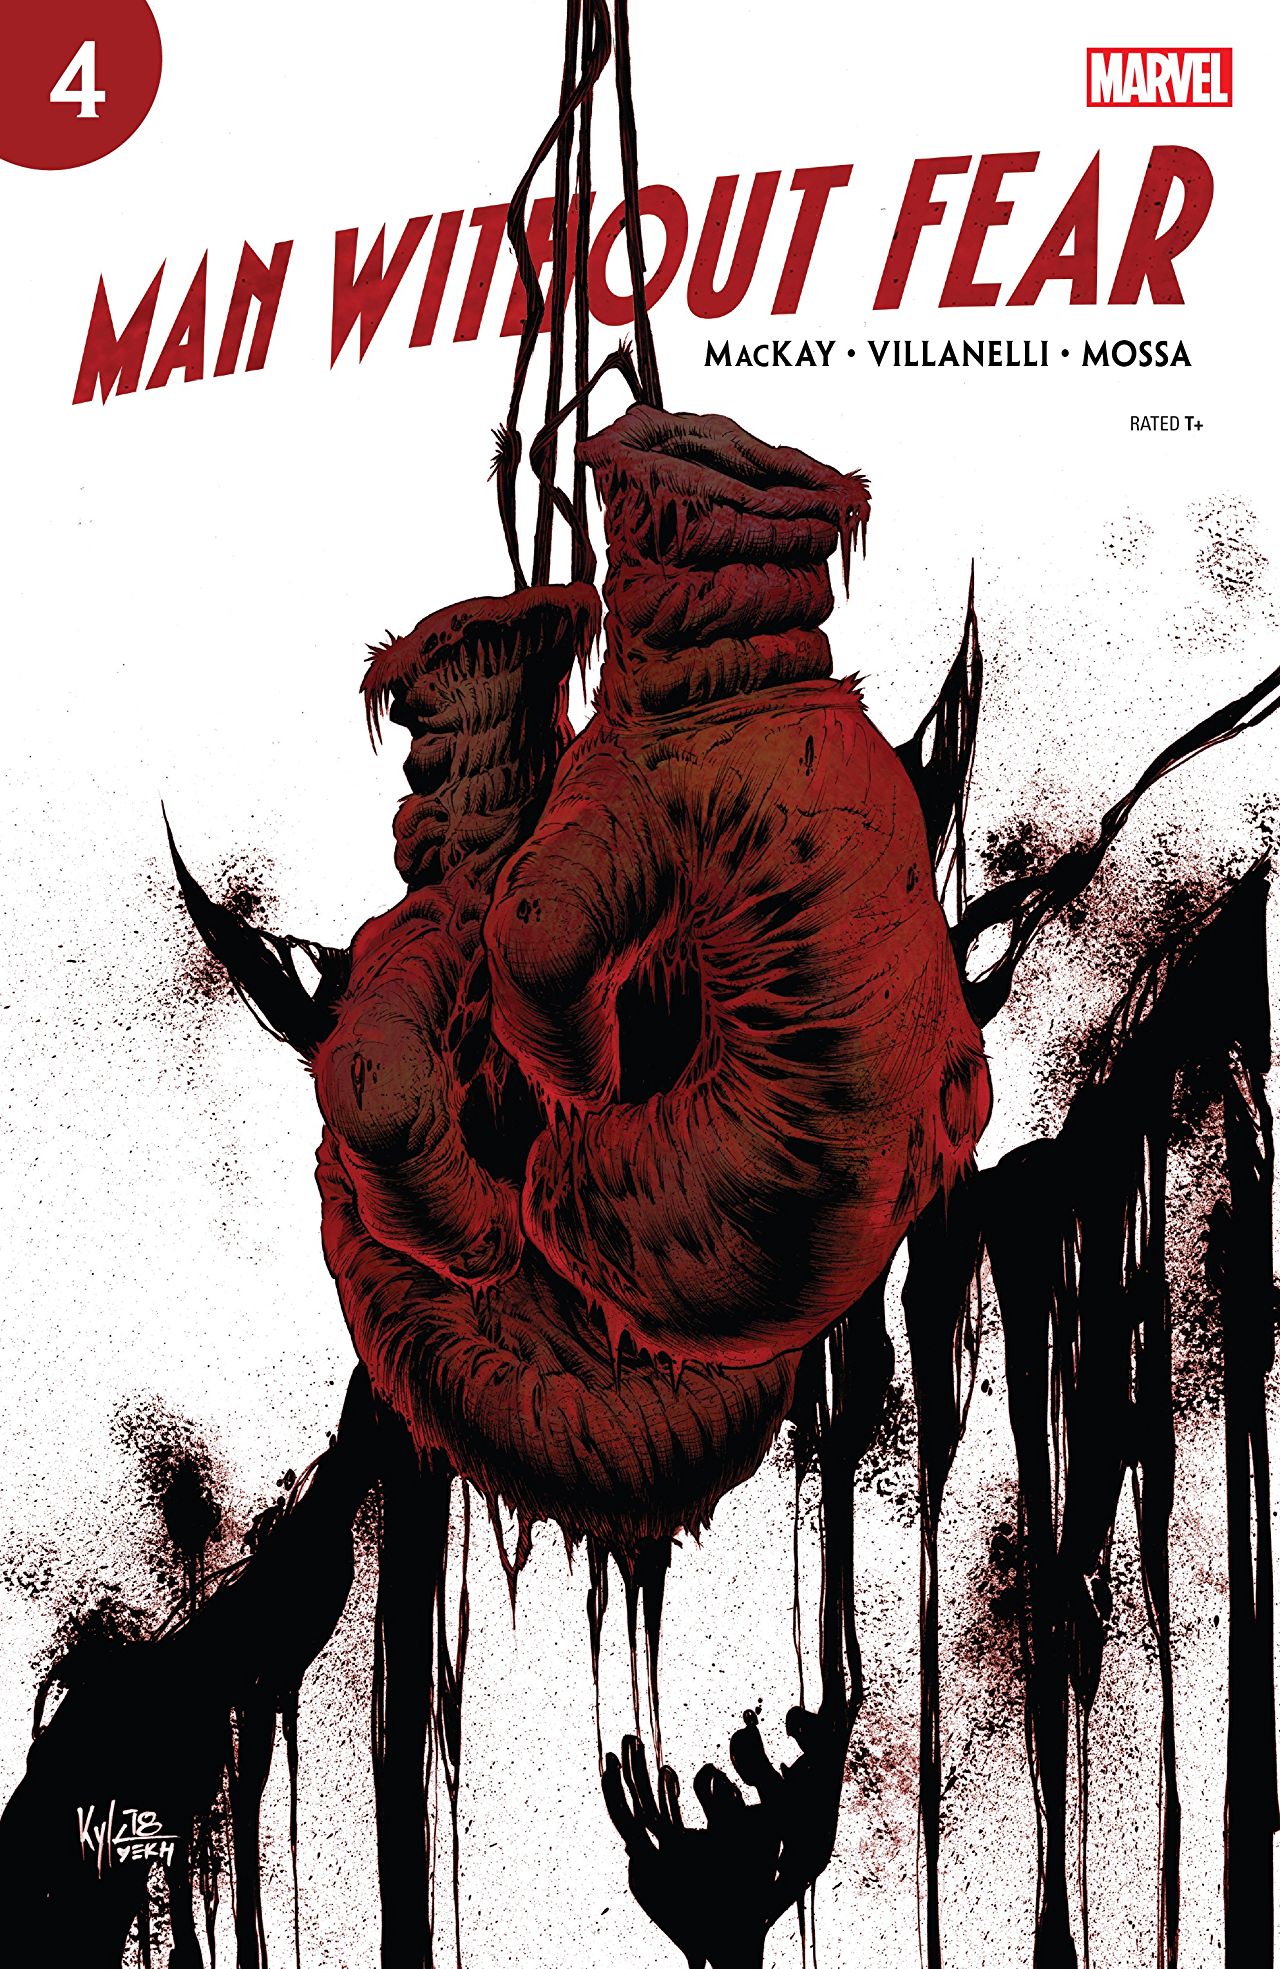 Marvel Preview: Man Without Fear #4